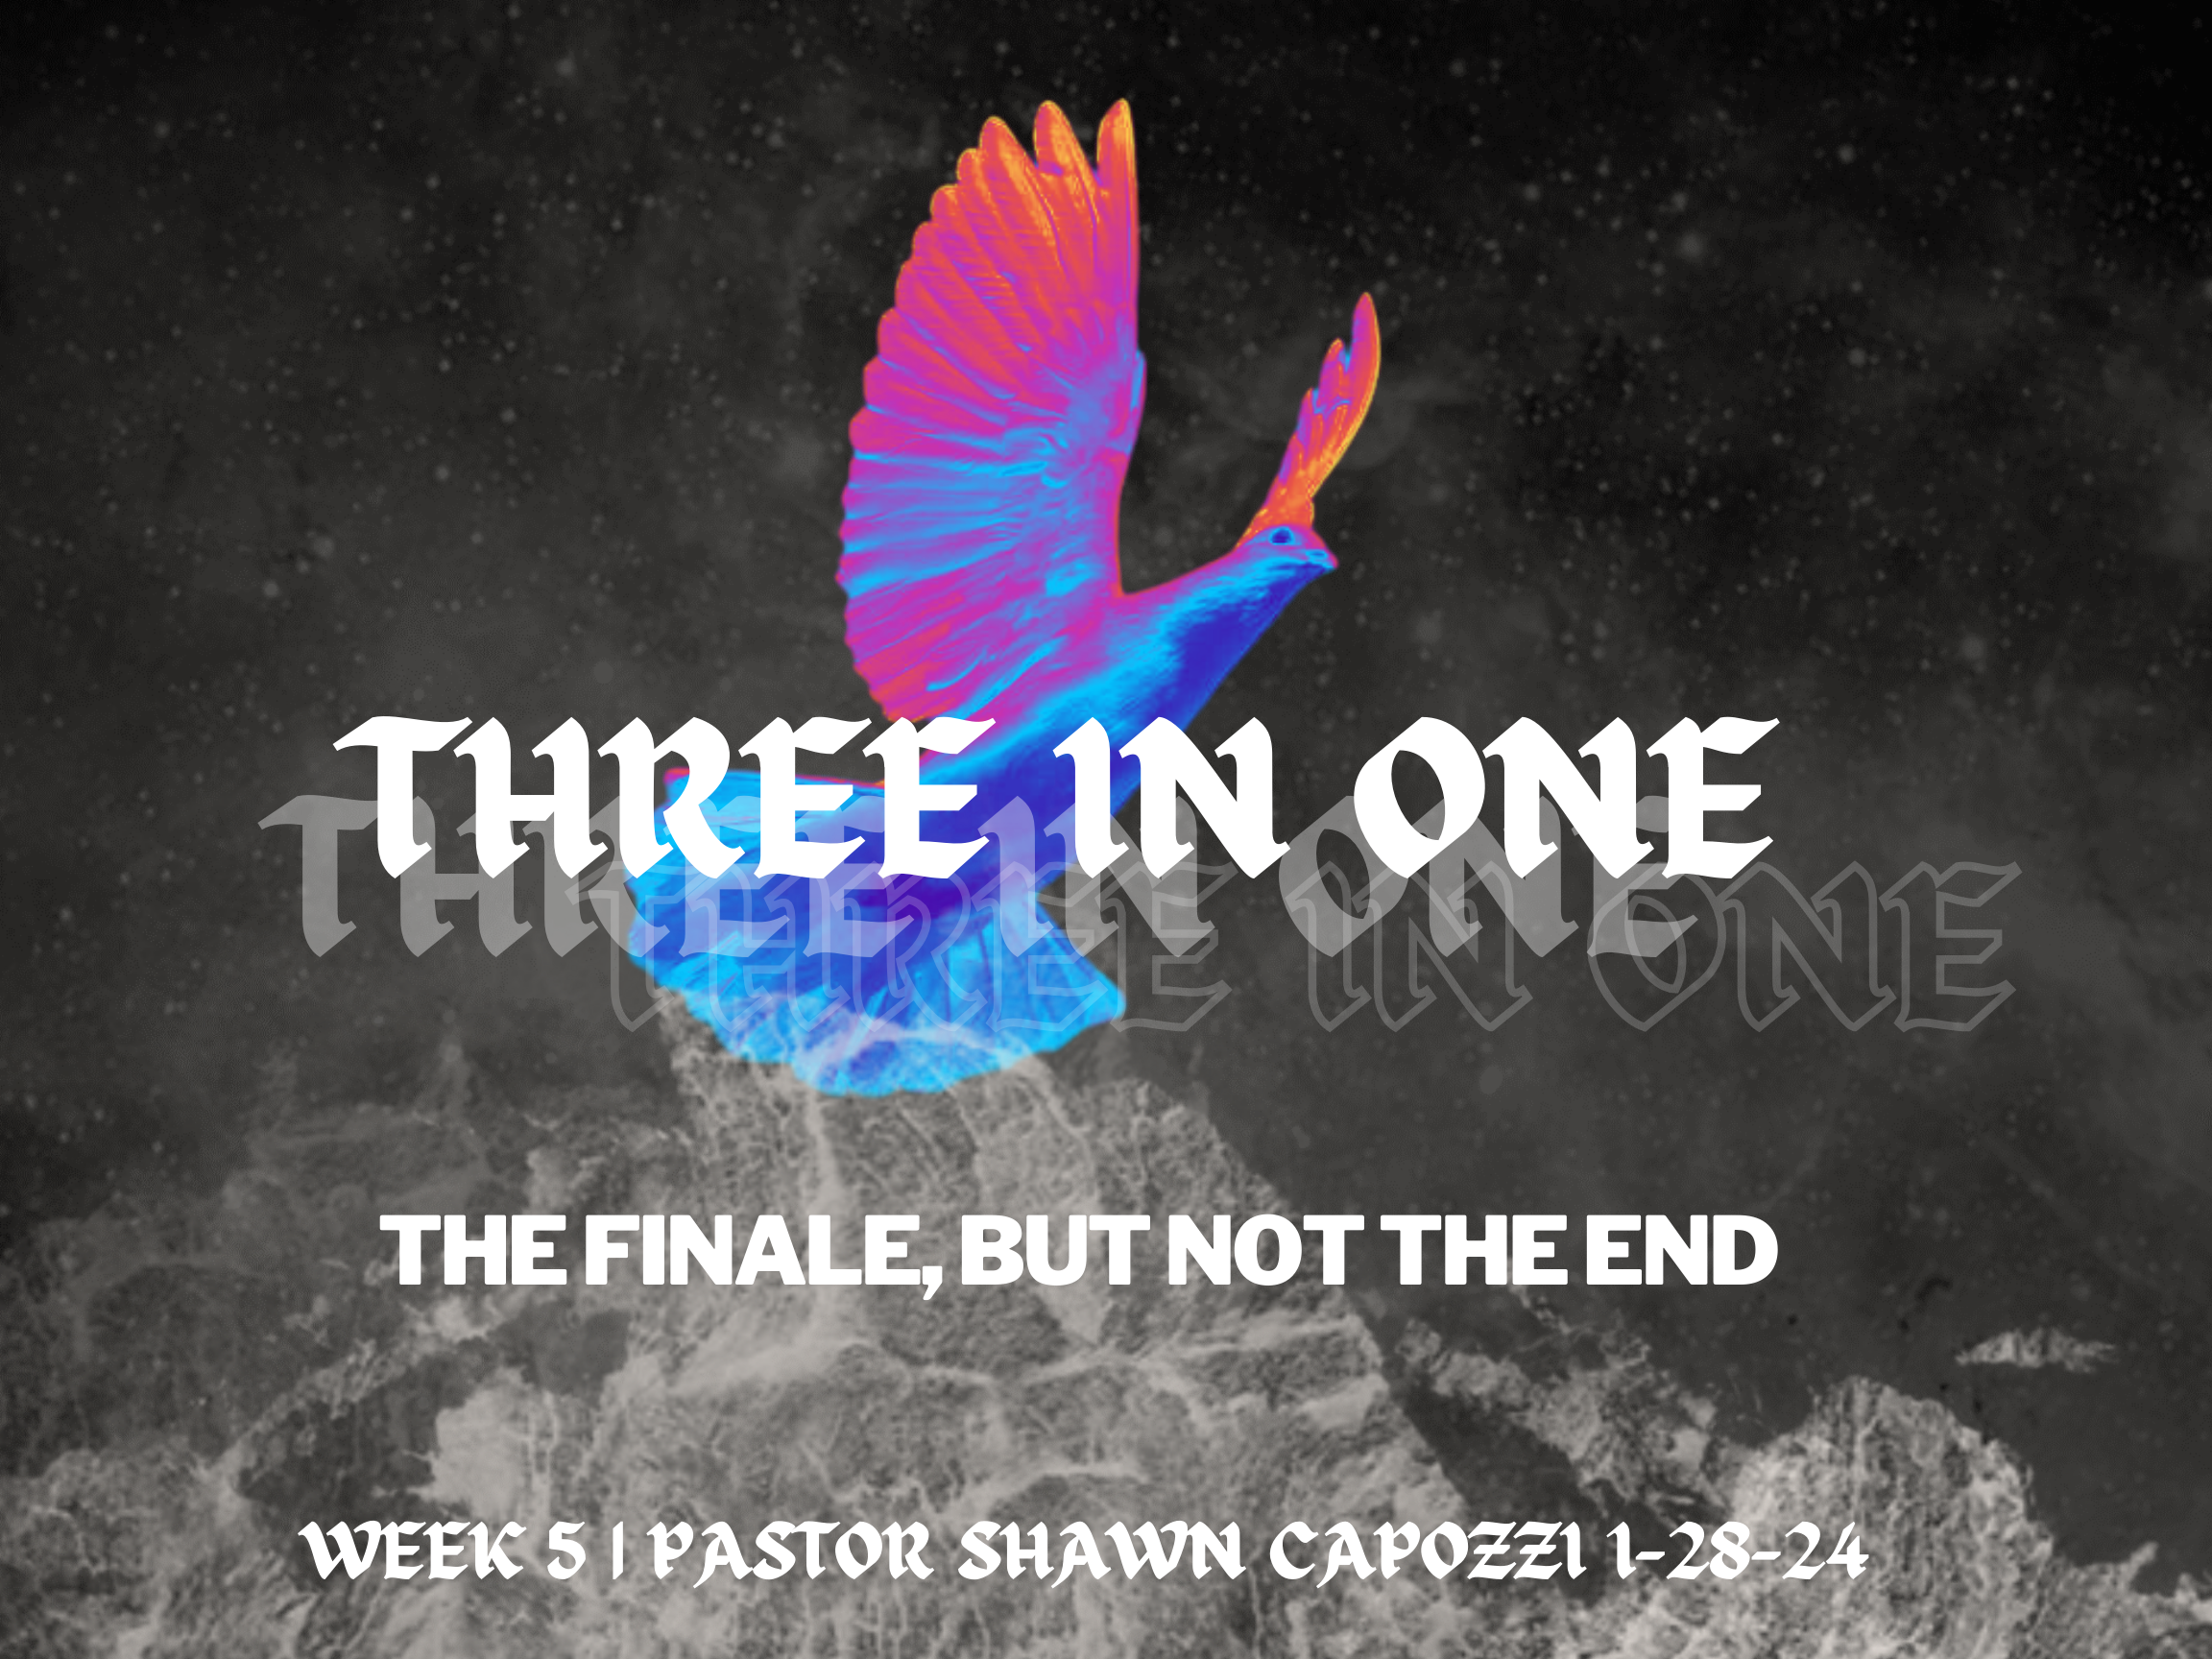 Three in One - The Finale, but not the end